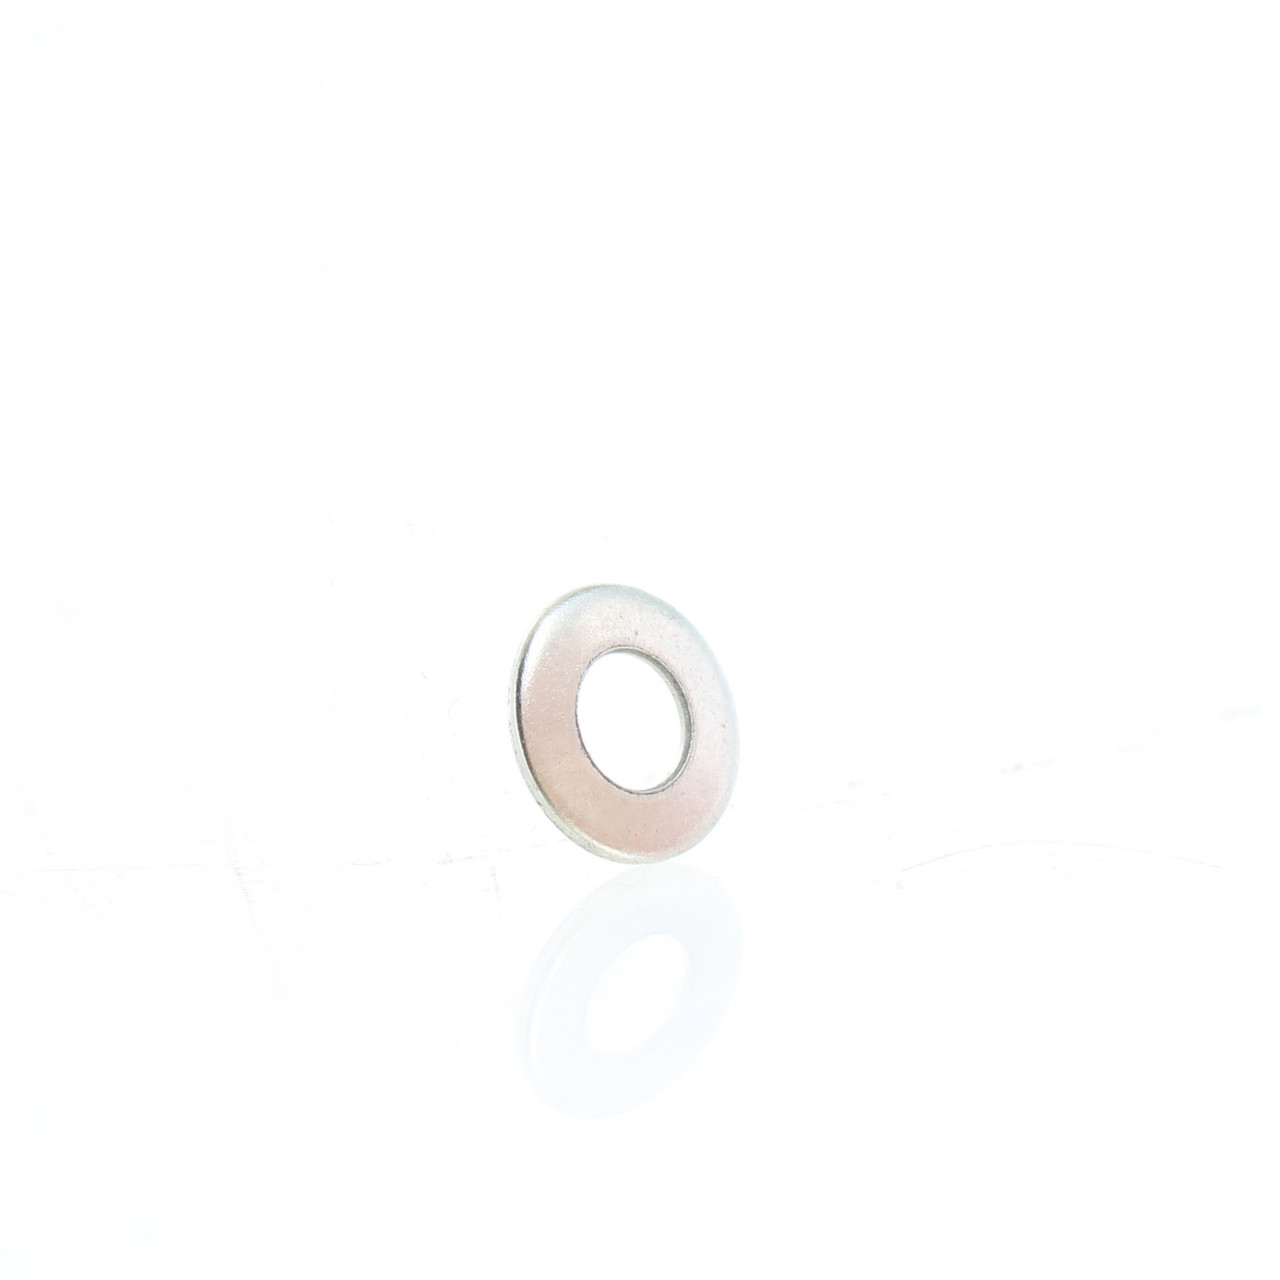 Can-Am New OEM Stainless Steel Flat Washer 3MM, 234031600